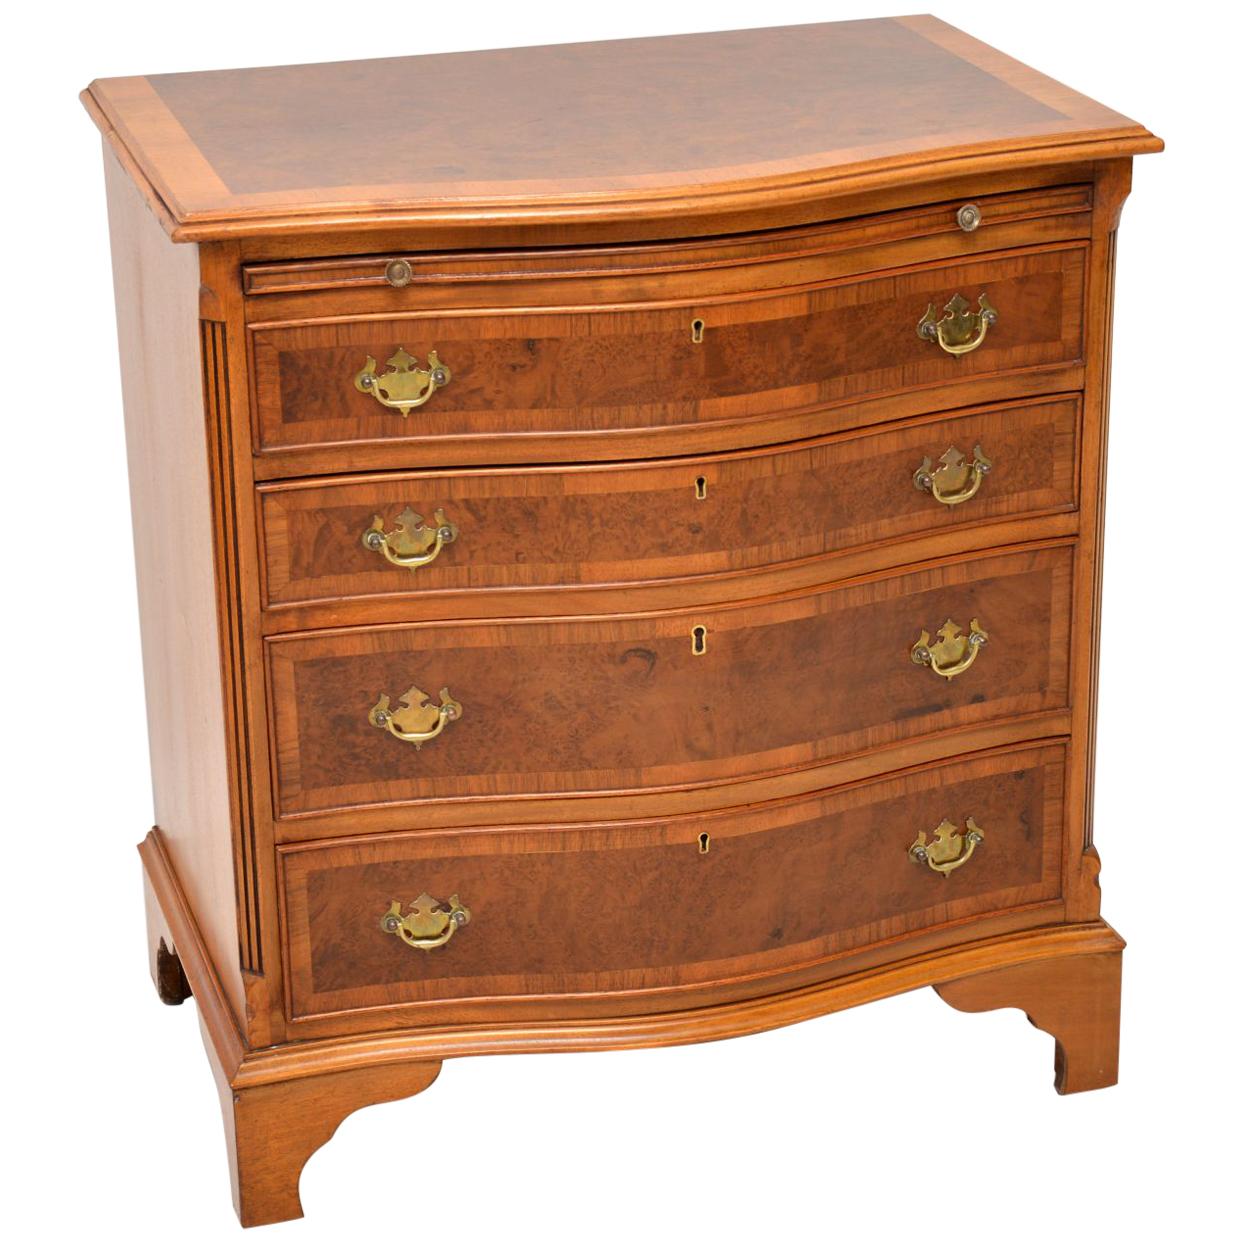 Antique Burr Walnut Chest of Drawers